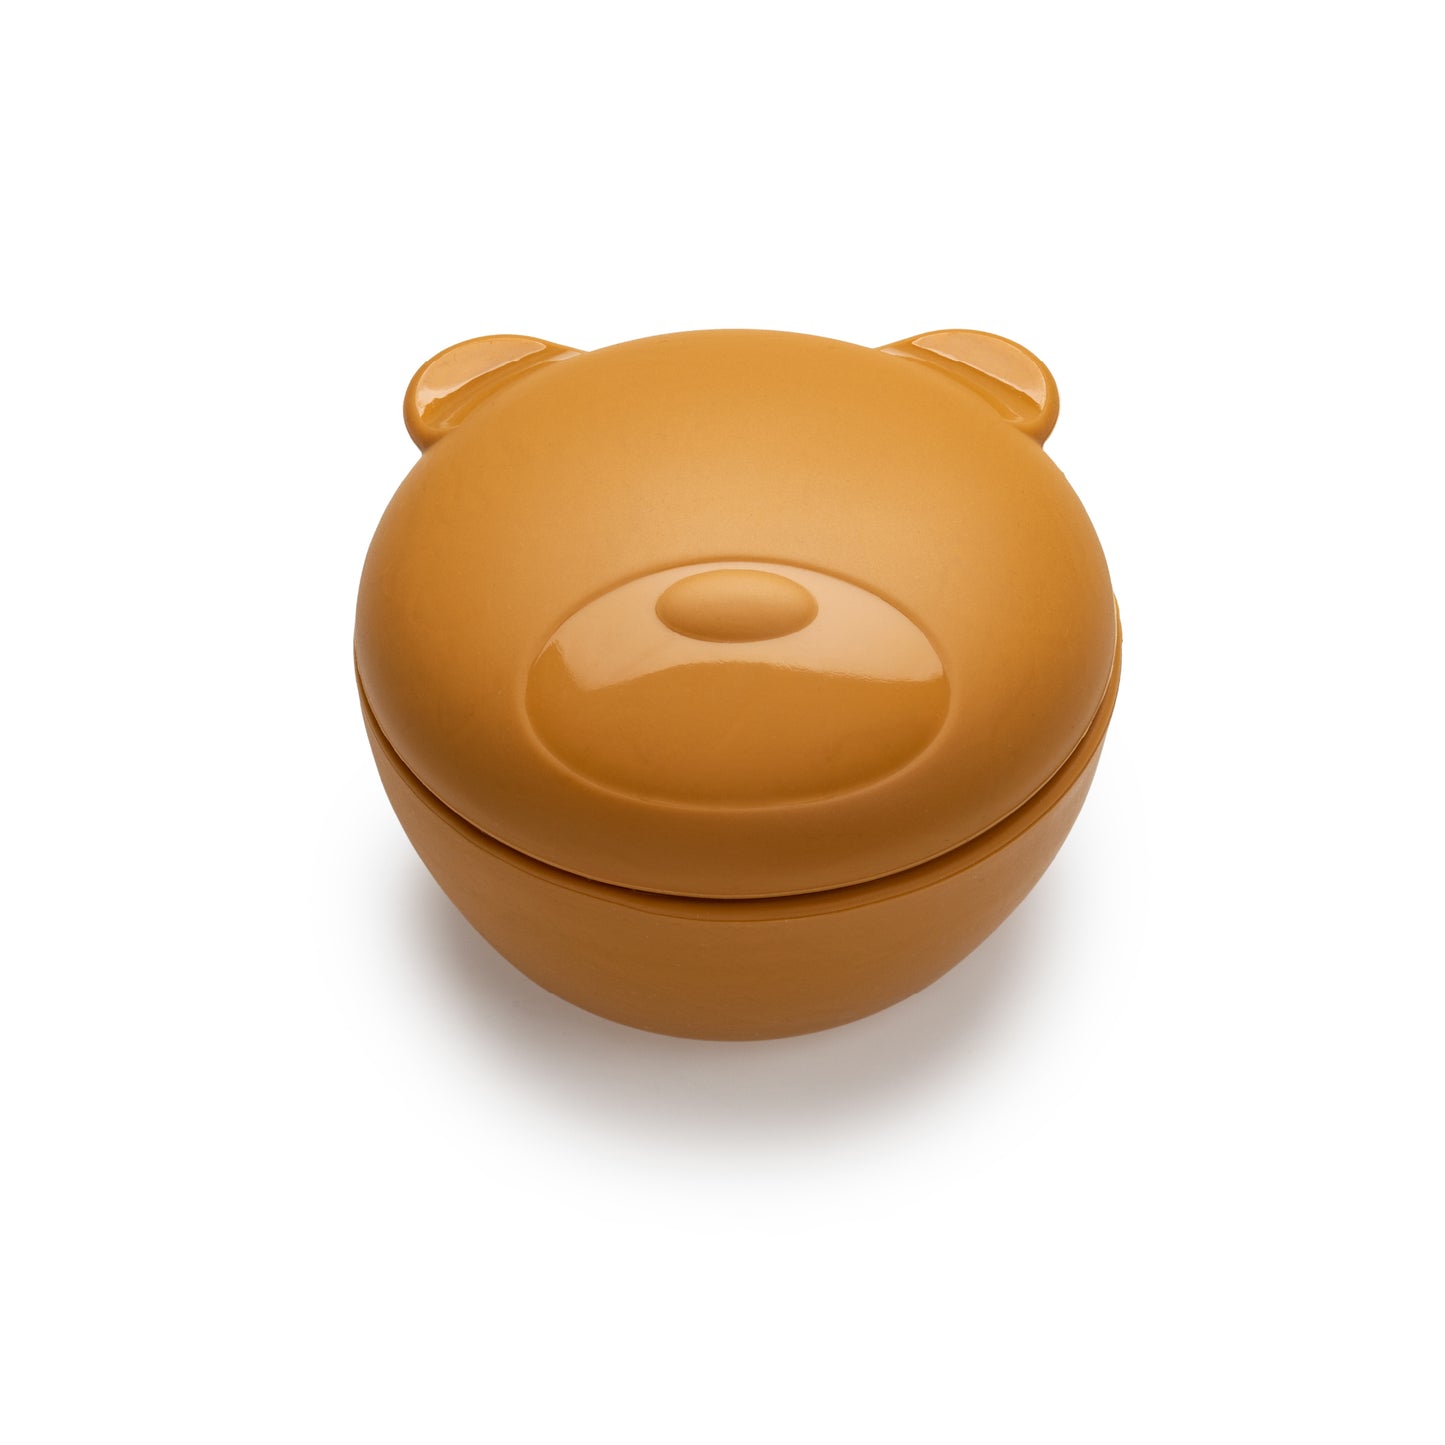 Melii Silicone Brown Bear Bowl with Lid 350 ml - Airtight & Leakproof Food Storage for Babies, Toddlers, Kids - BPA Free, Microwave Safe, Perfect for On-the-Go Meals Snacks